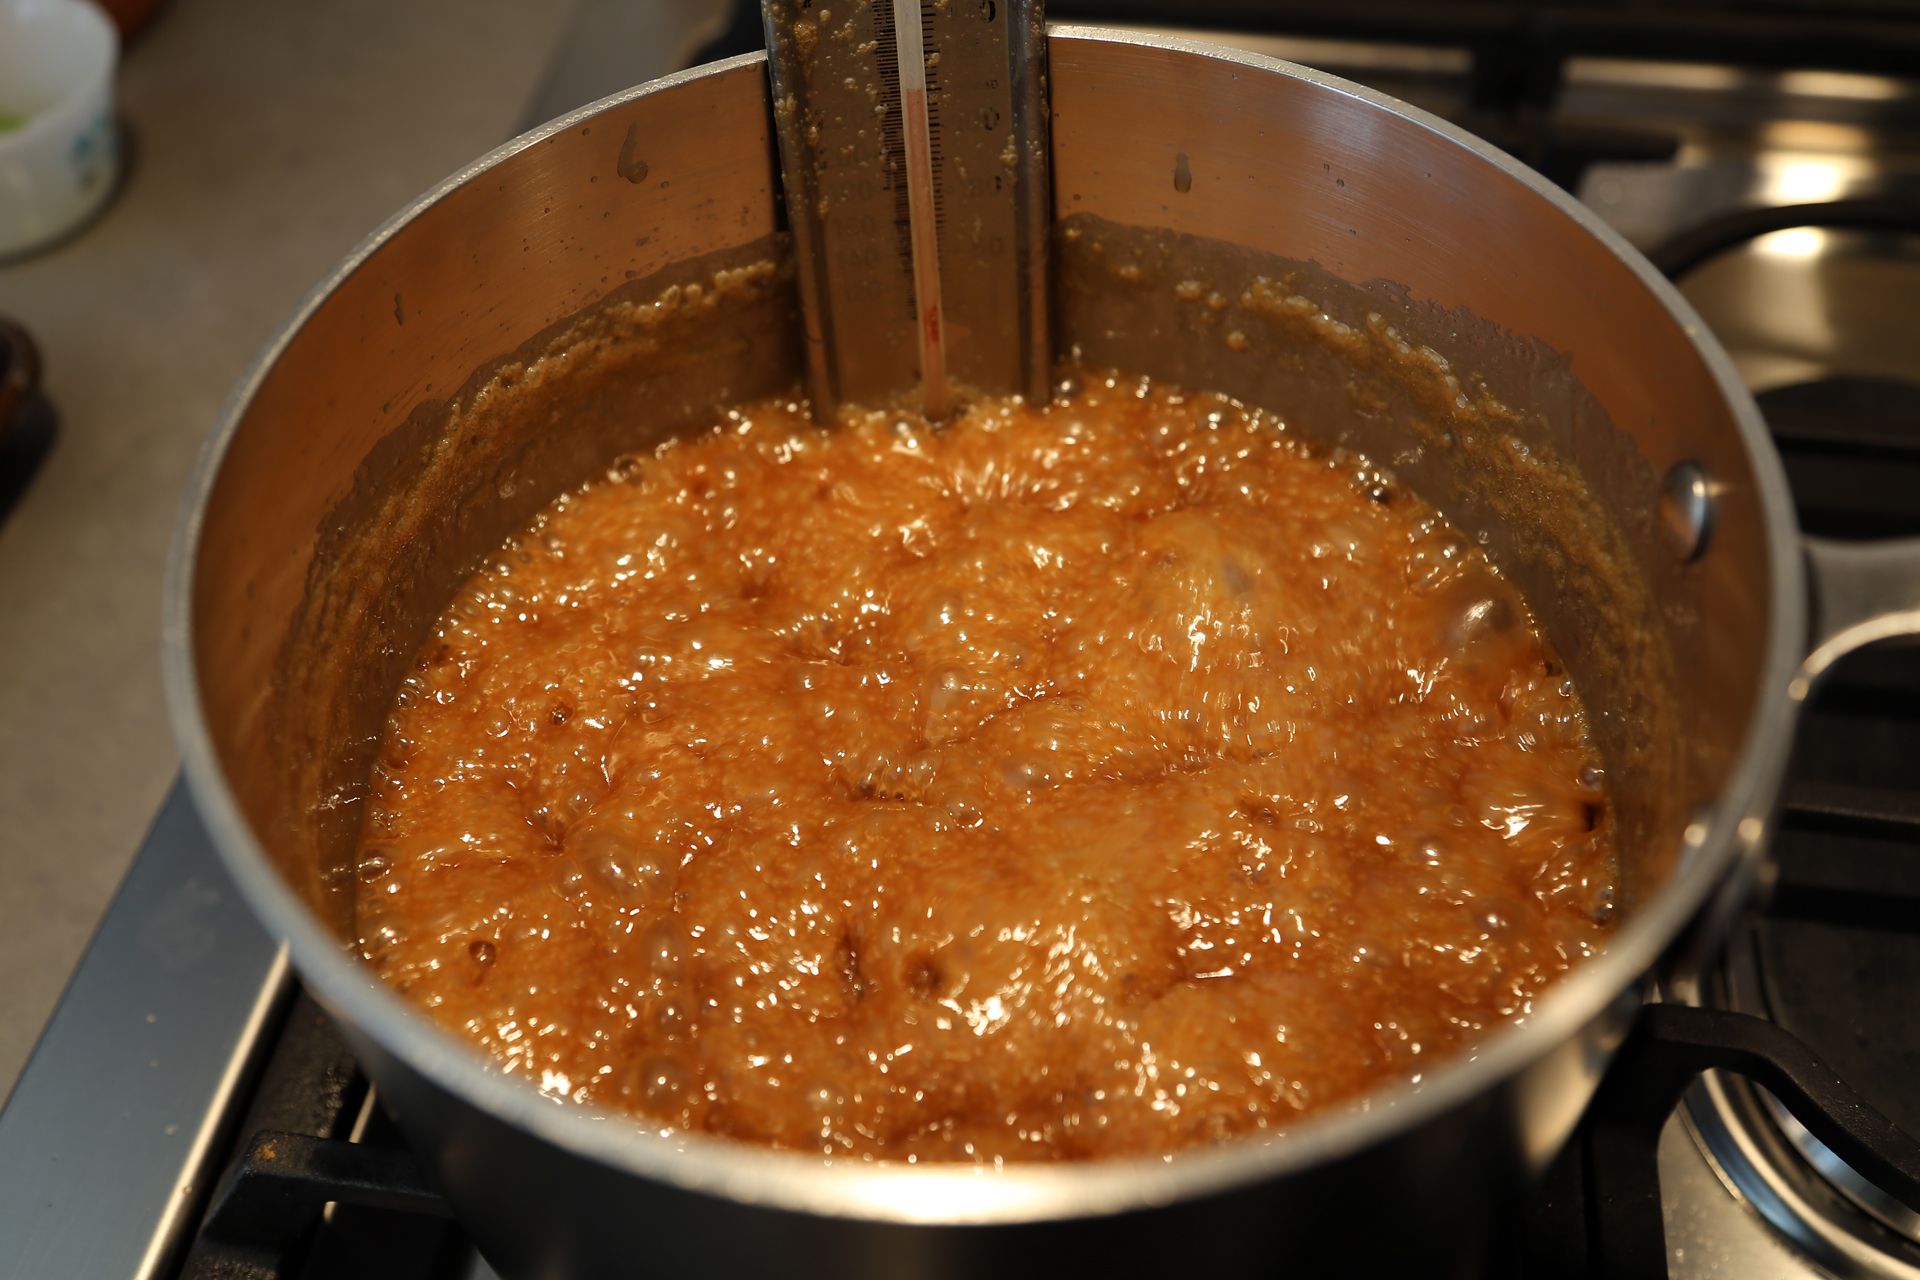 In a deep, heavy saucepan over medium heat, stir together the sugar, cream, corn syrup, butter, vanilla, and salt. Cook, swirling the pan occasionally, until the mixture is thick and syrupy and registers 245F.